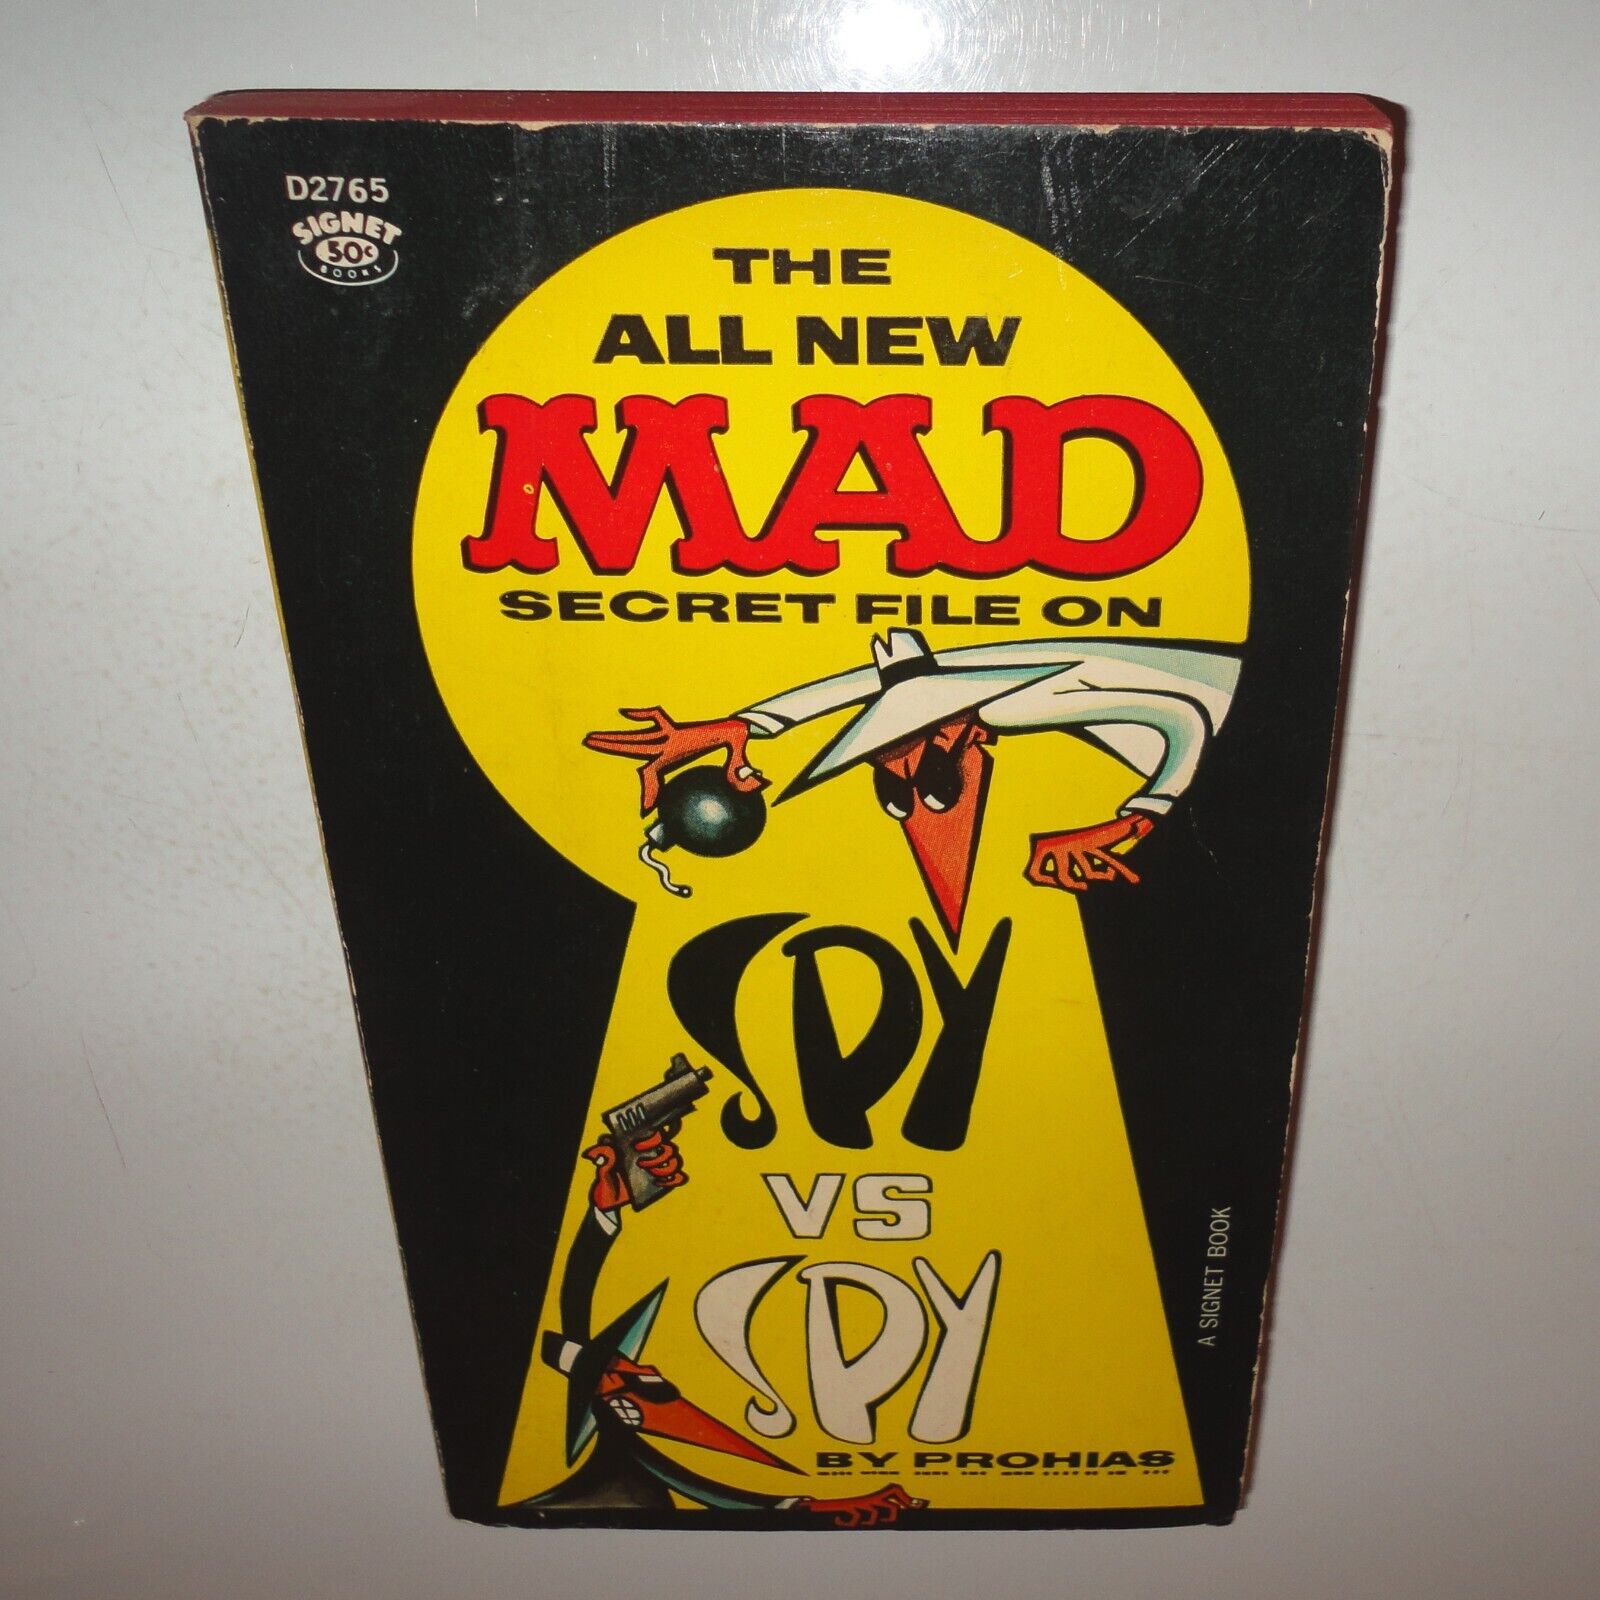 The All New Mad Secret File on Spy vs Spy 1965 First Printing Signet Paperback